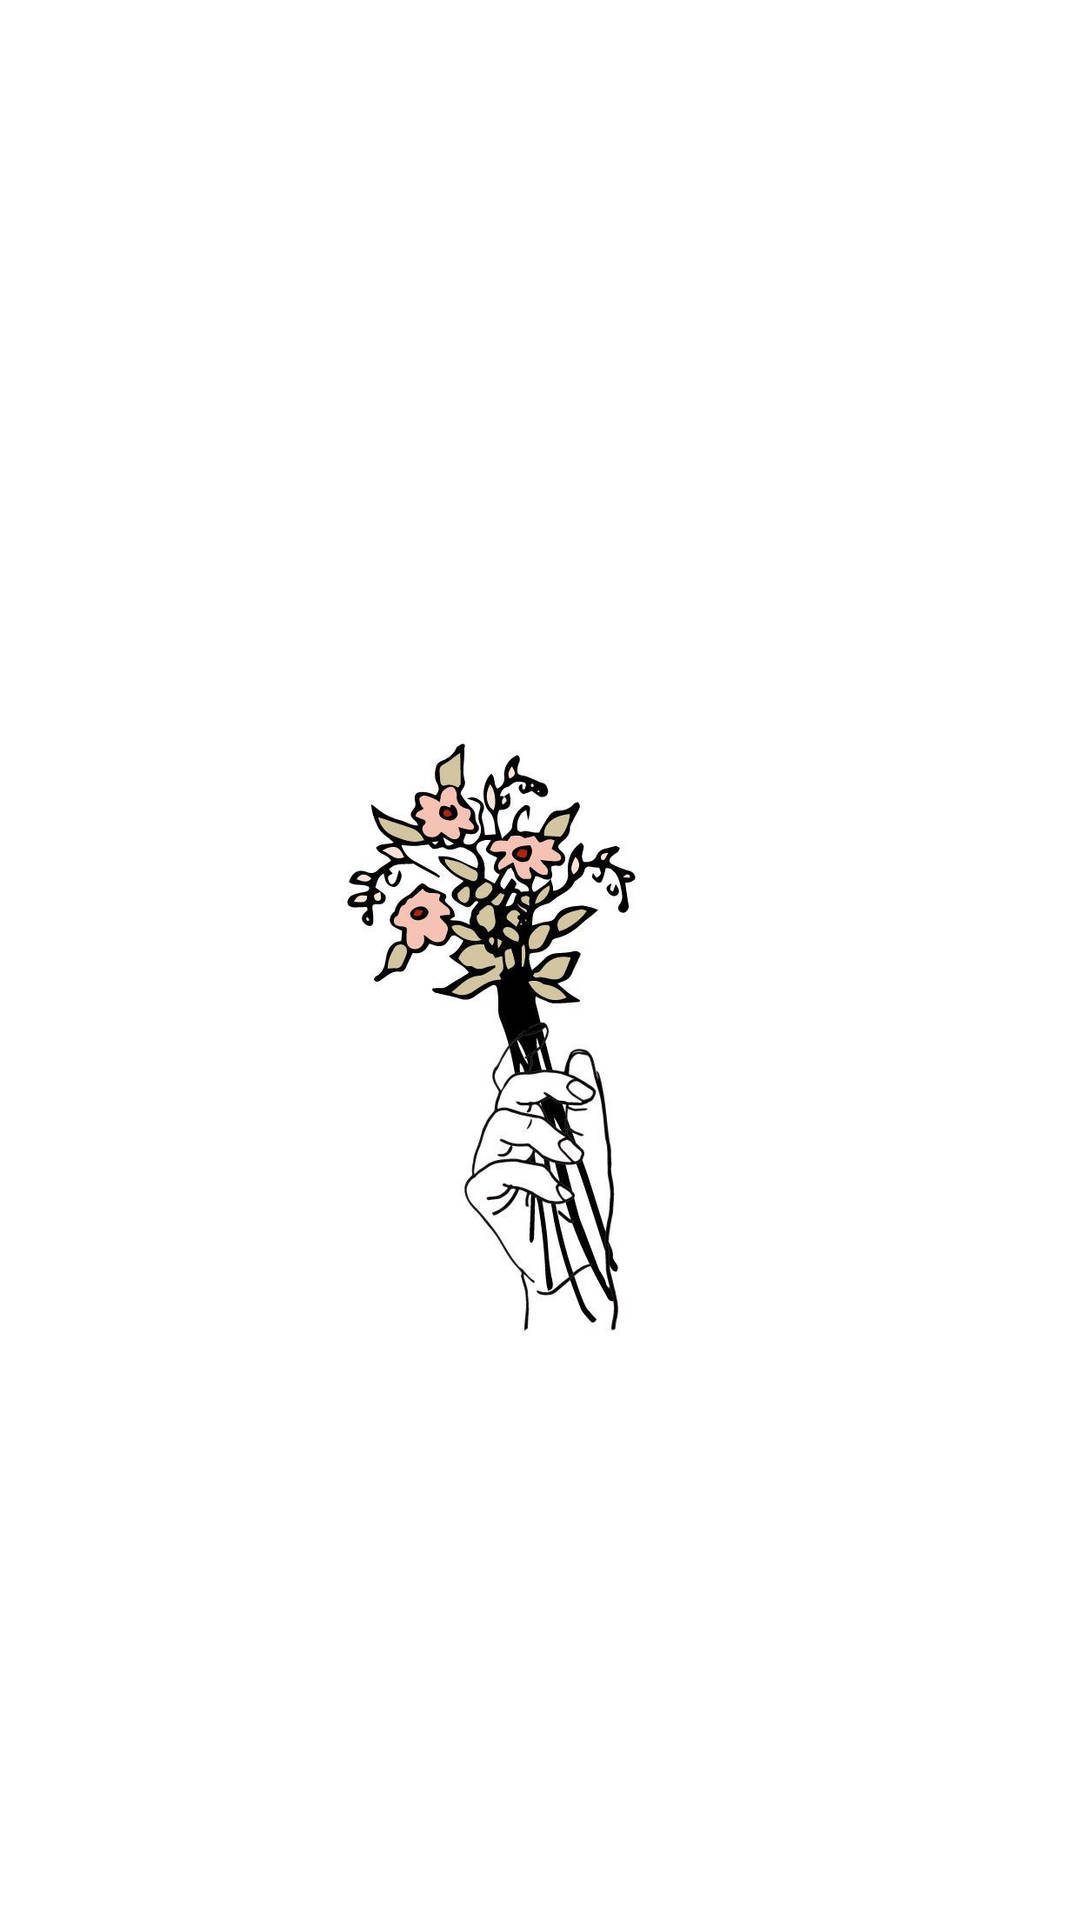 Aesthetic Hand With Flower Plain White Background